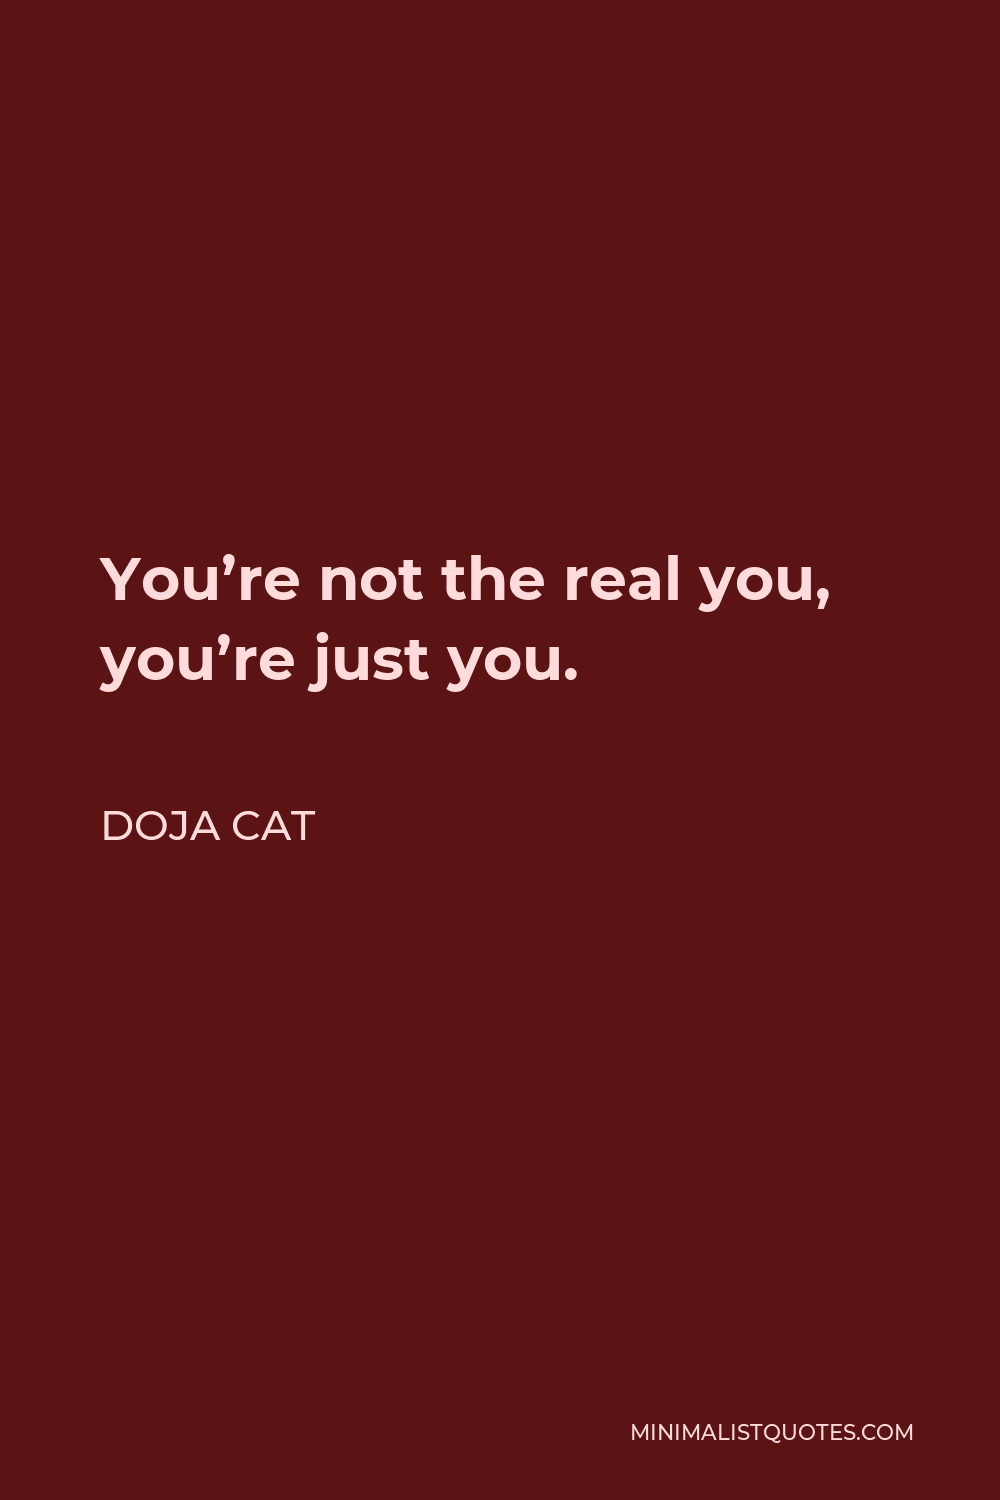 Doja Cat Quote - You’re not the real you, you’re just you.